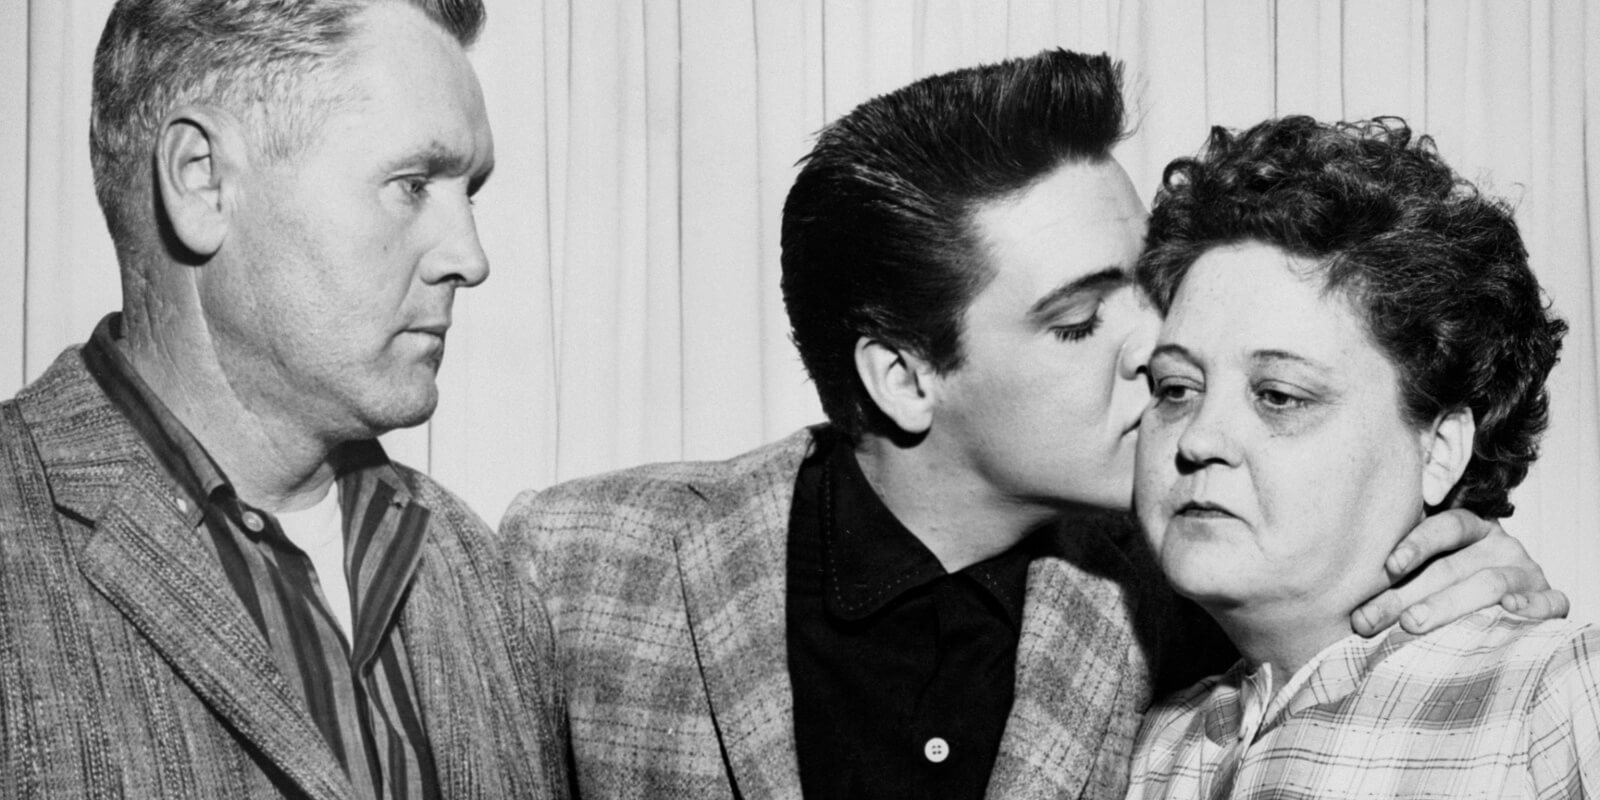 Vernon, Elvis, and Gladys Presley photographed together on the eve of his US Army induction.